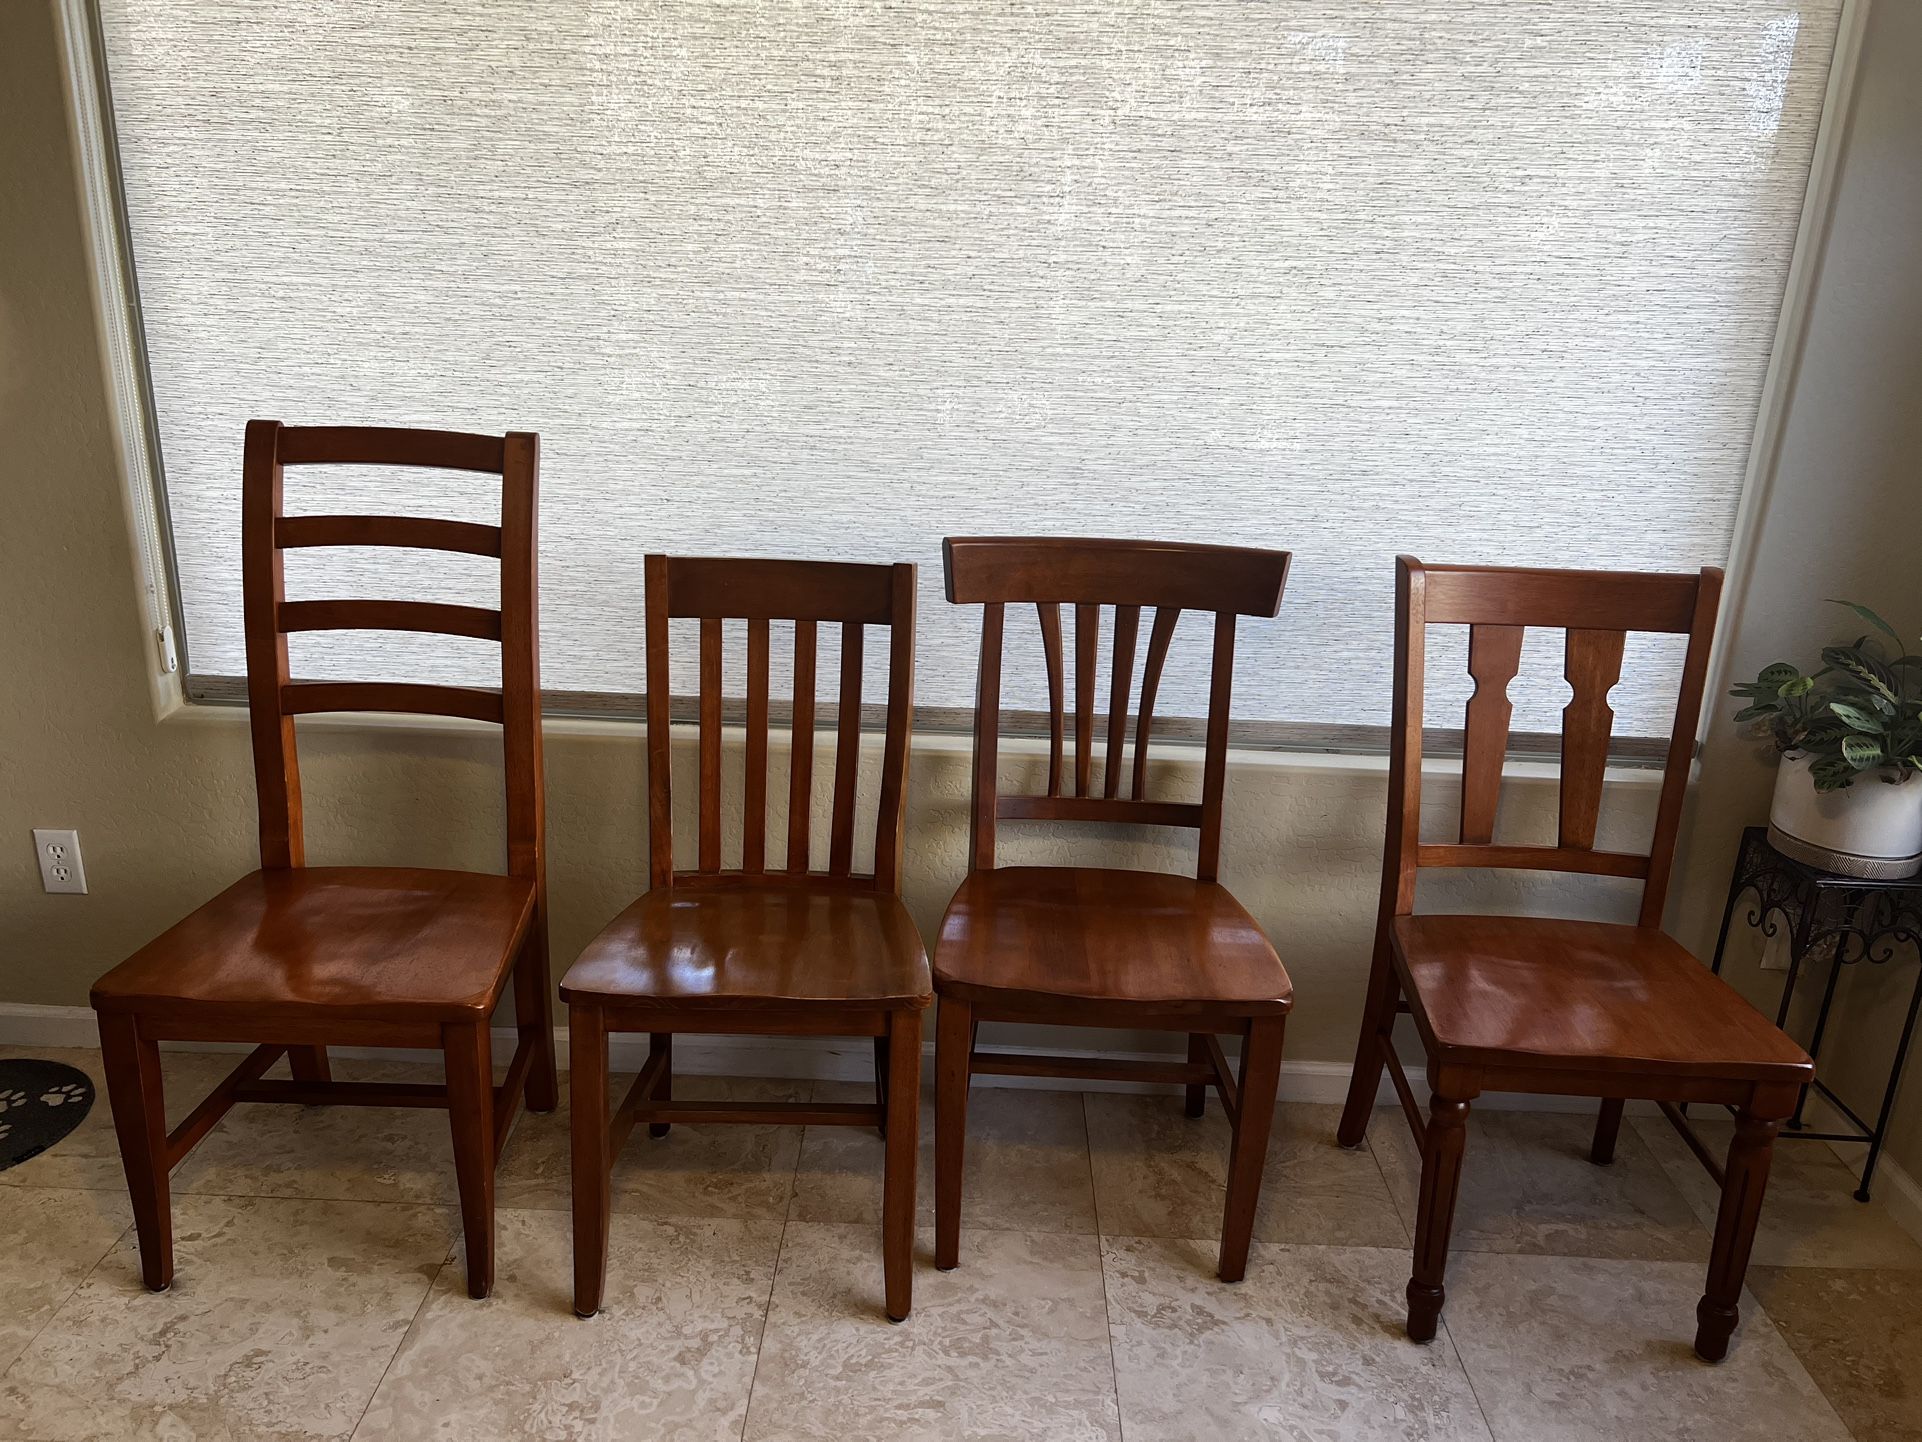 4 Wooden Dining Room Chairs